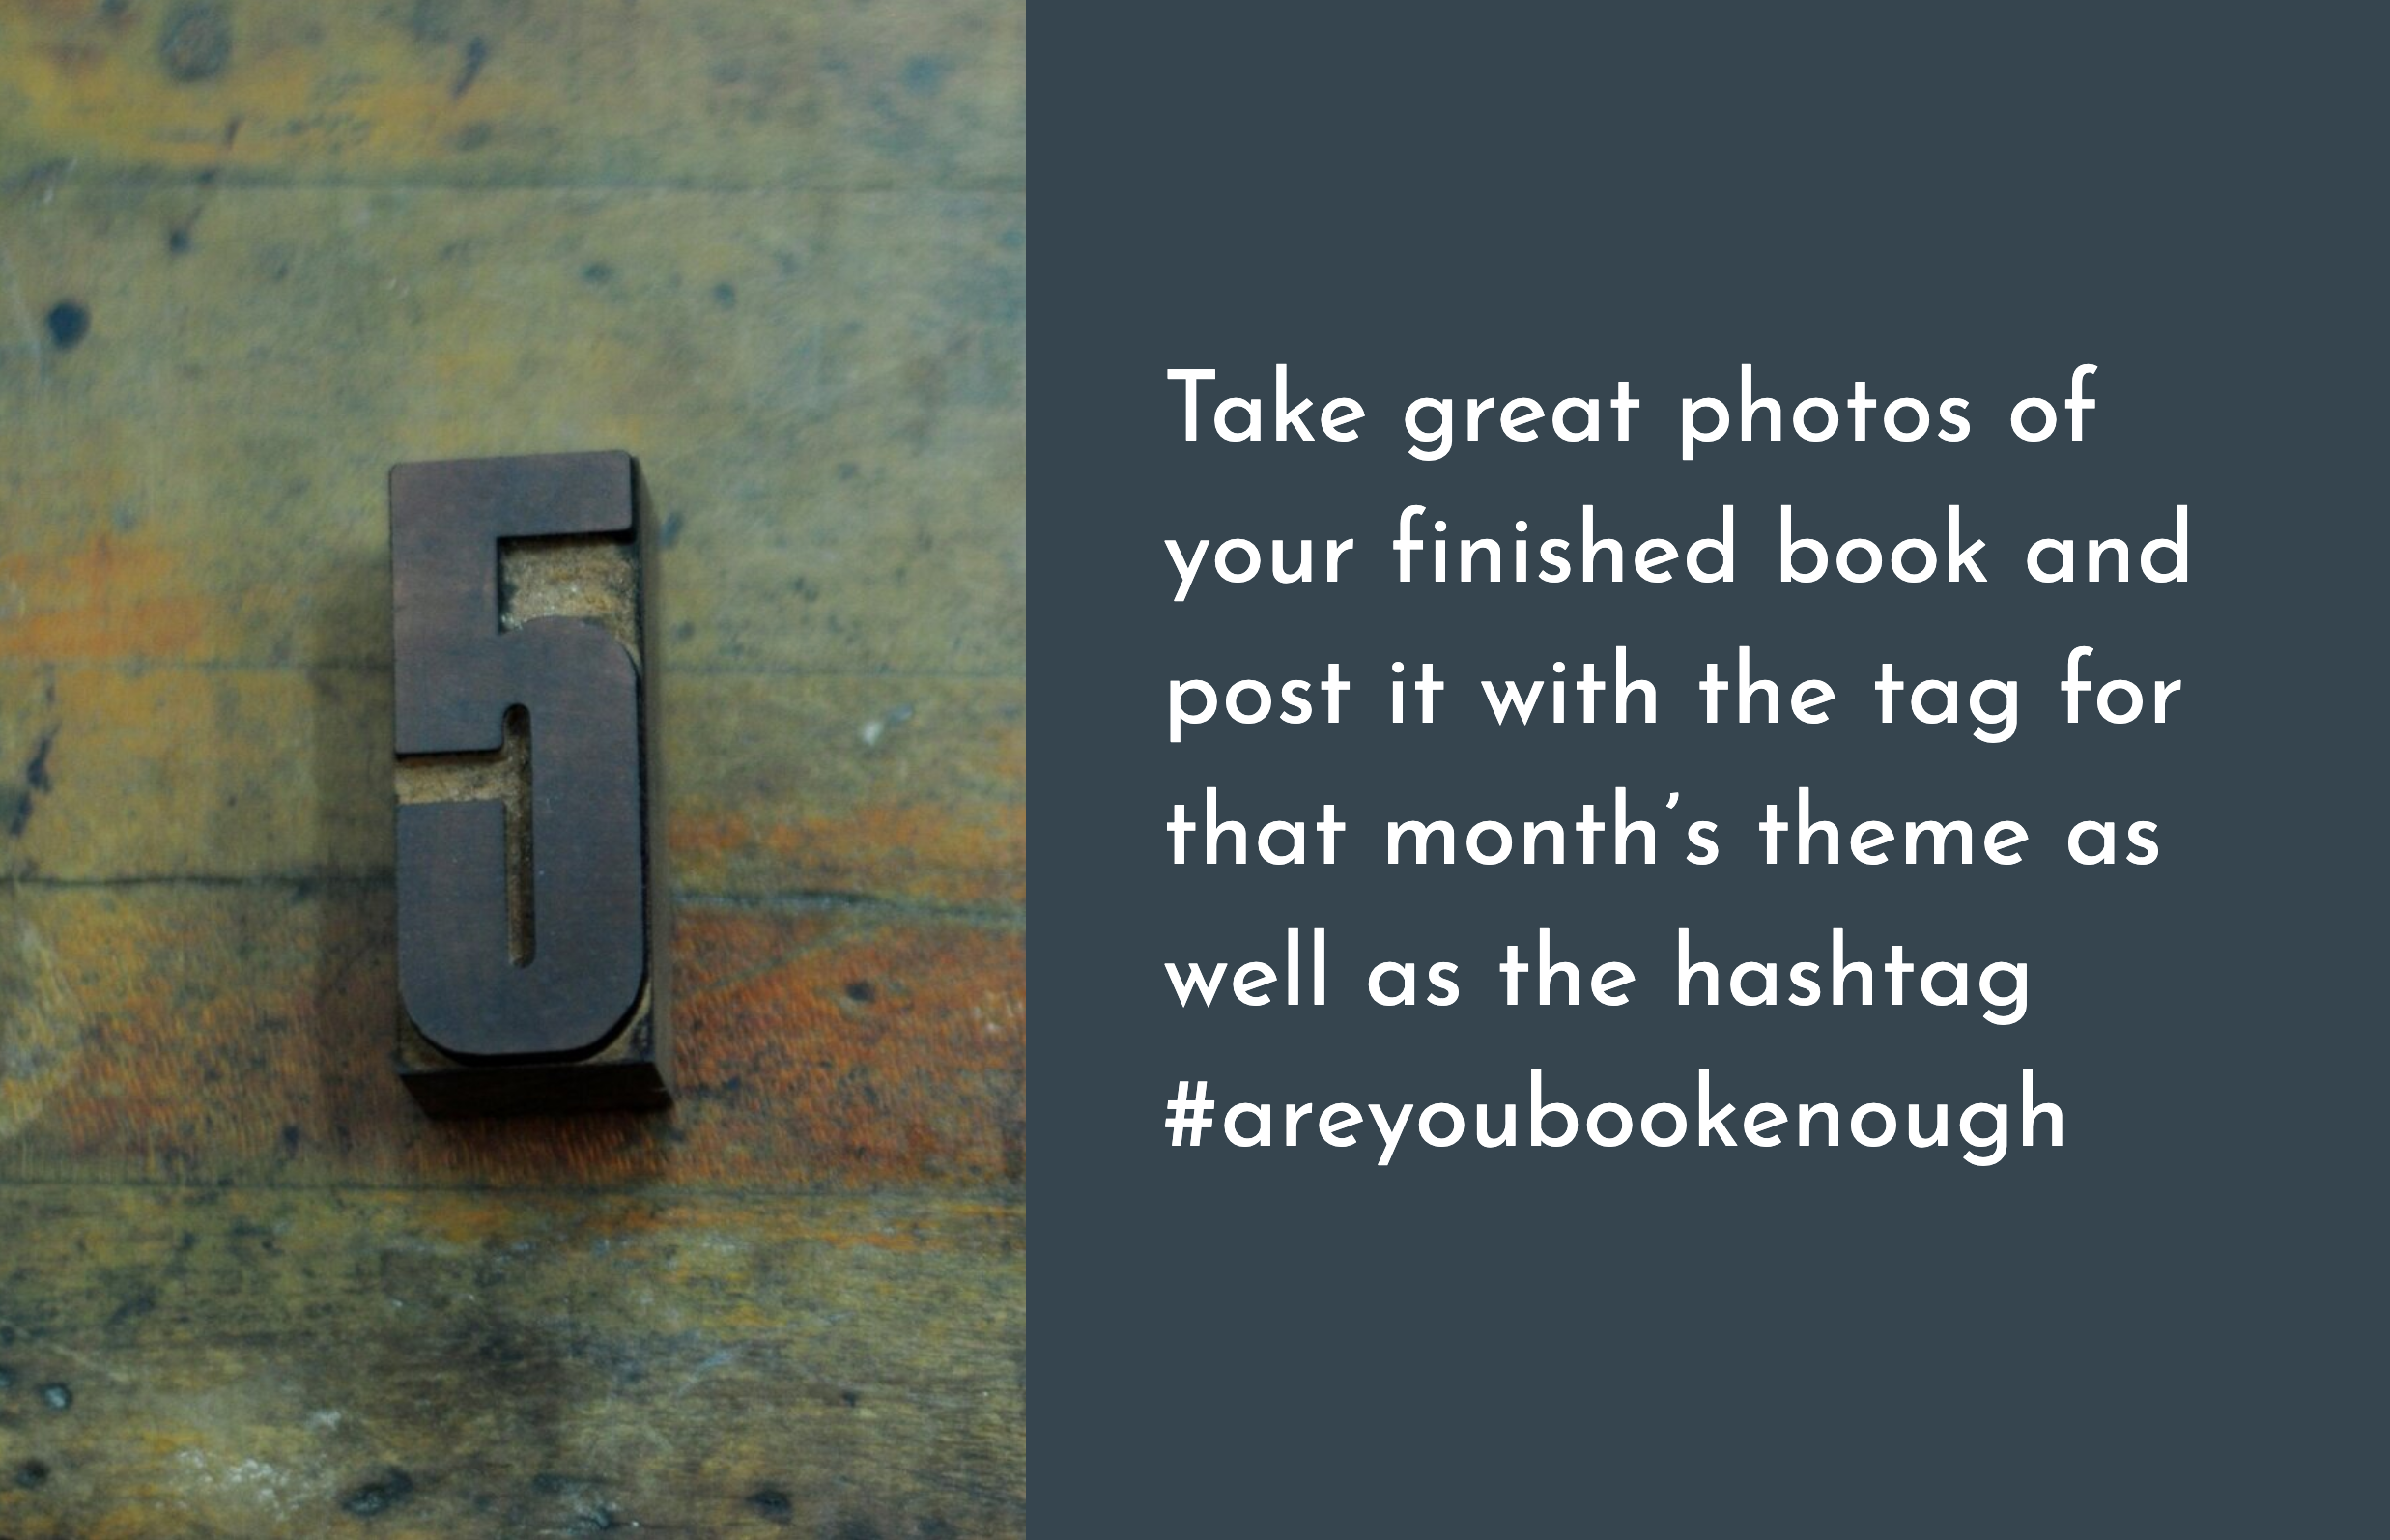  Take great photos of your finished book and post it with the tag for that month’s theme as well as #areyoubookenough. 